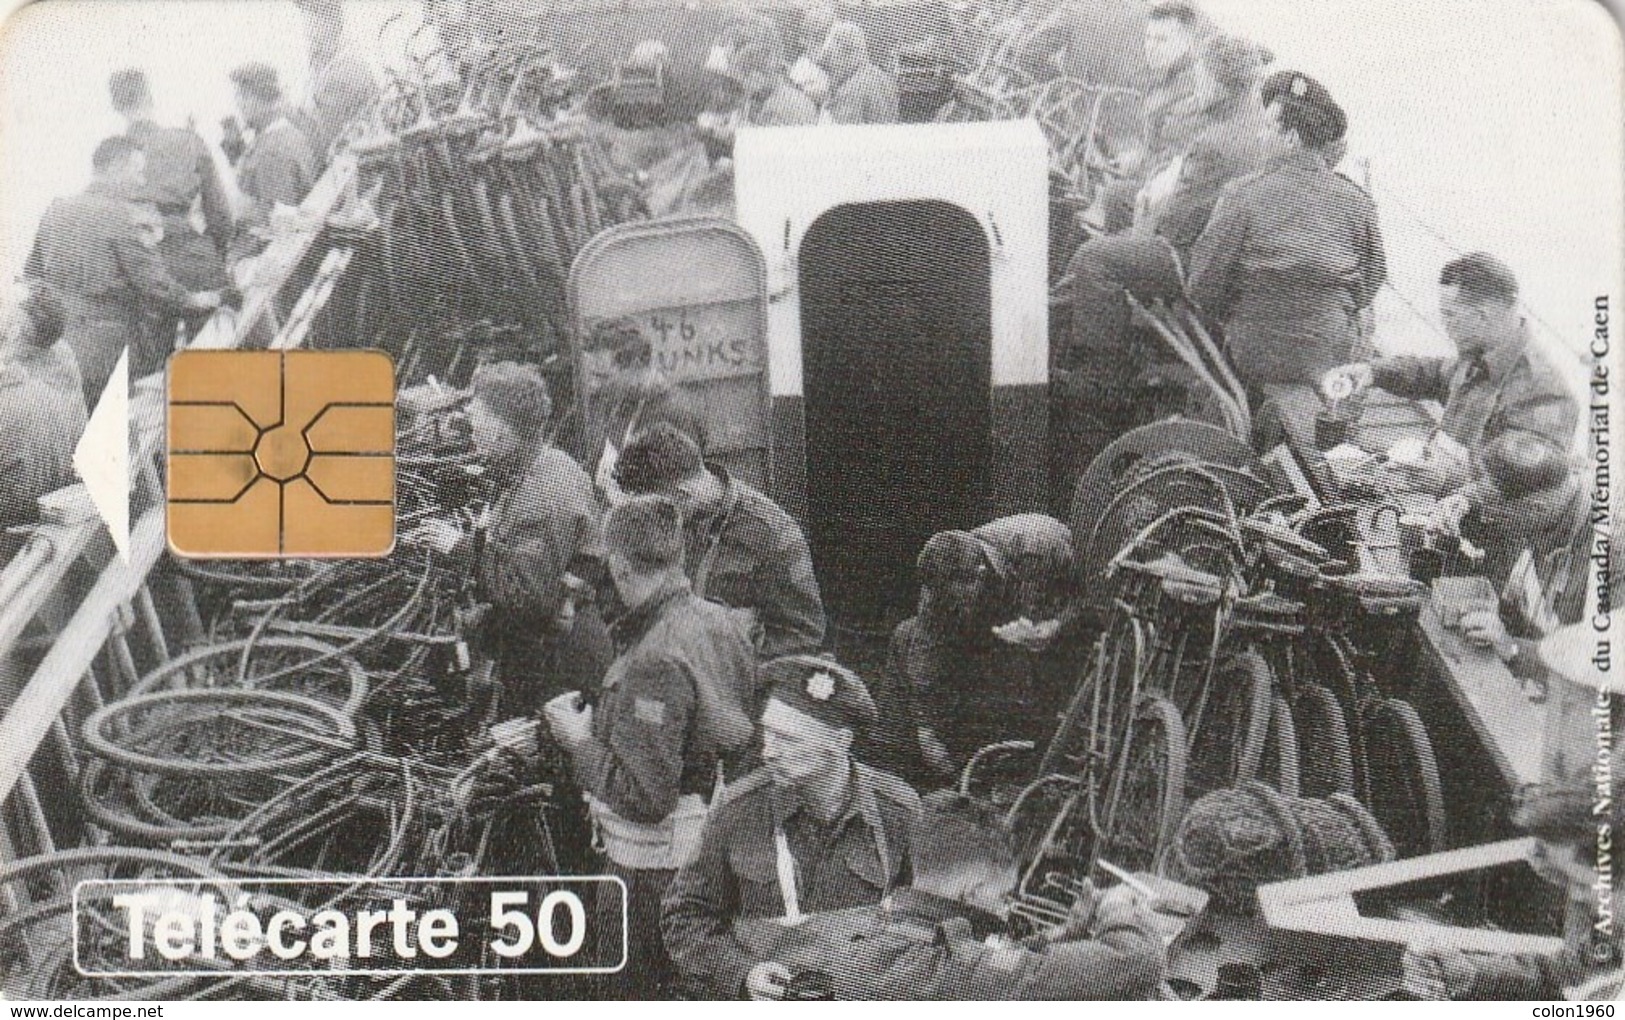 FRANCIA. 50th Anniversary Of Landings And The Liberation Of France. Debarquement Flotille. 0474. 06/94. (309). - Armada